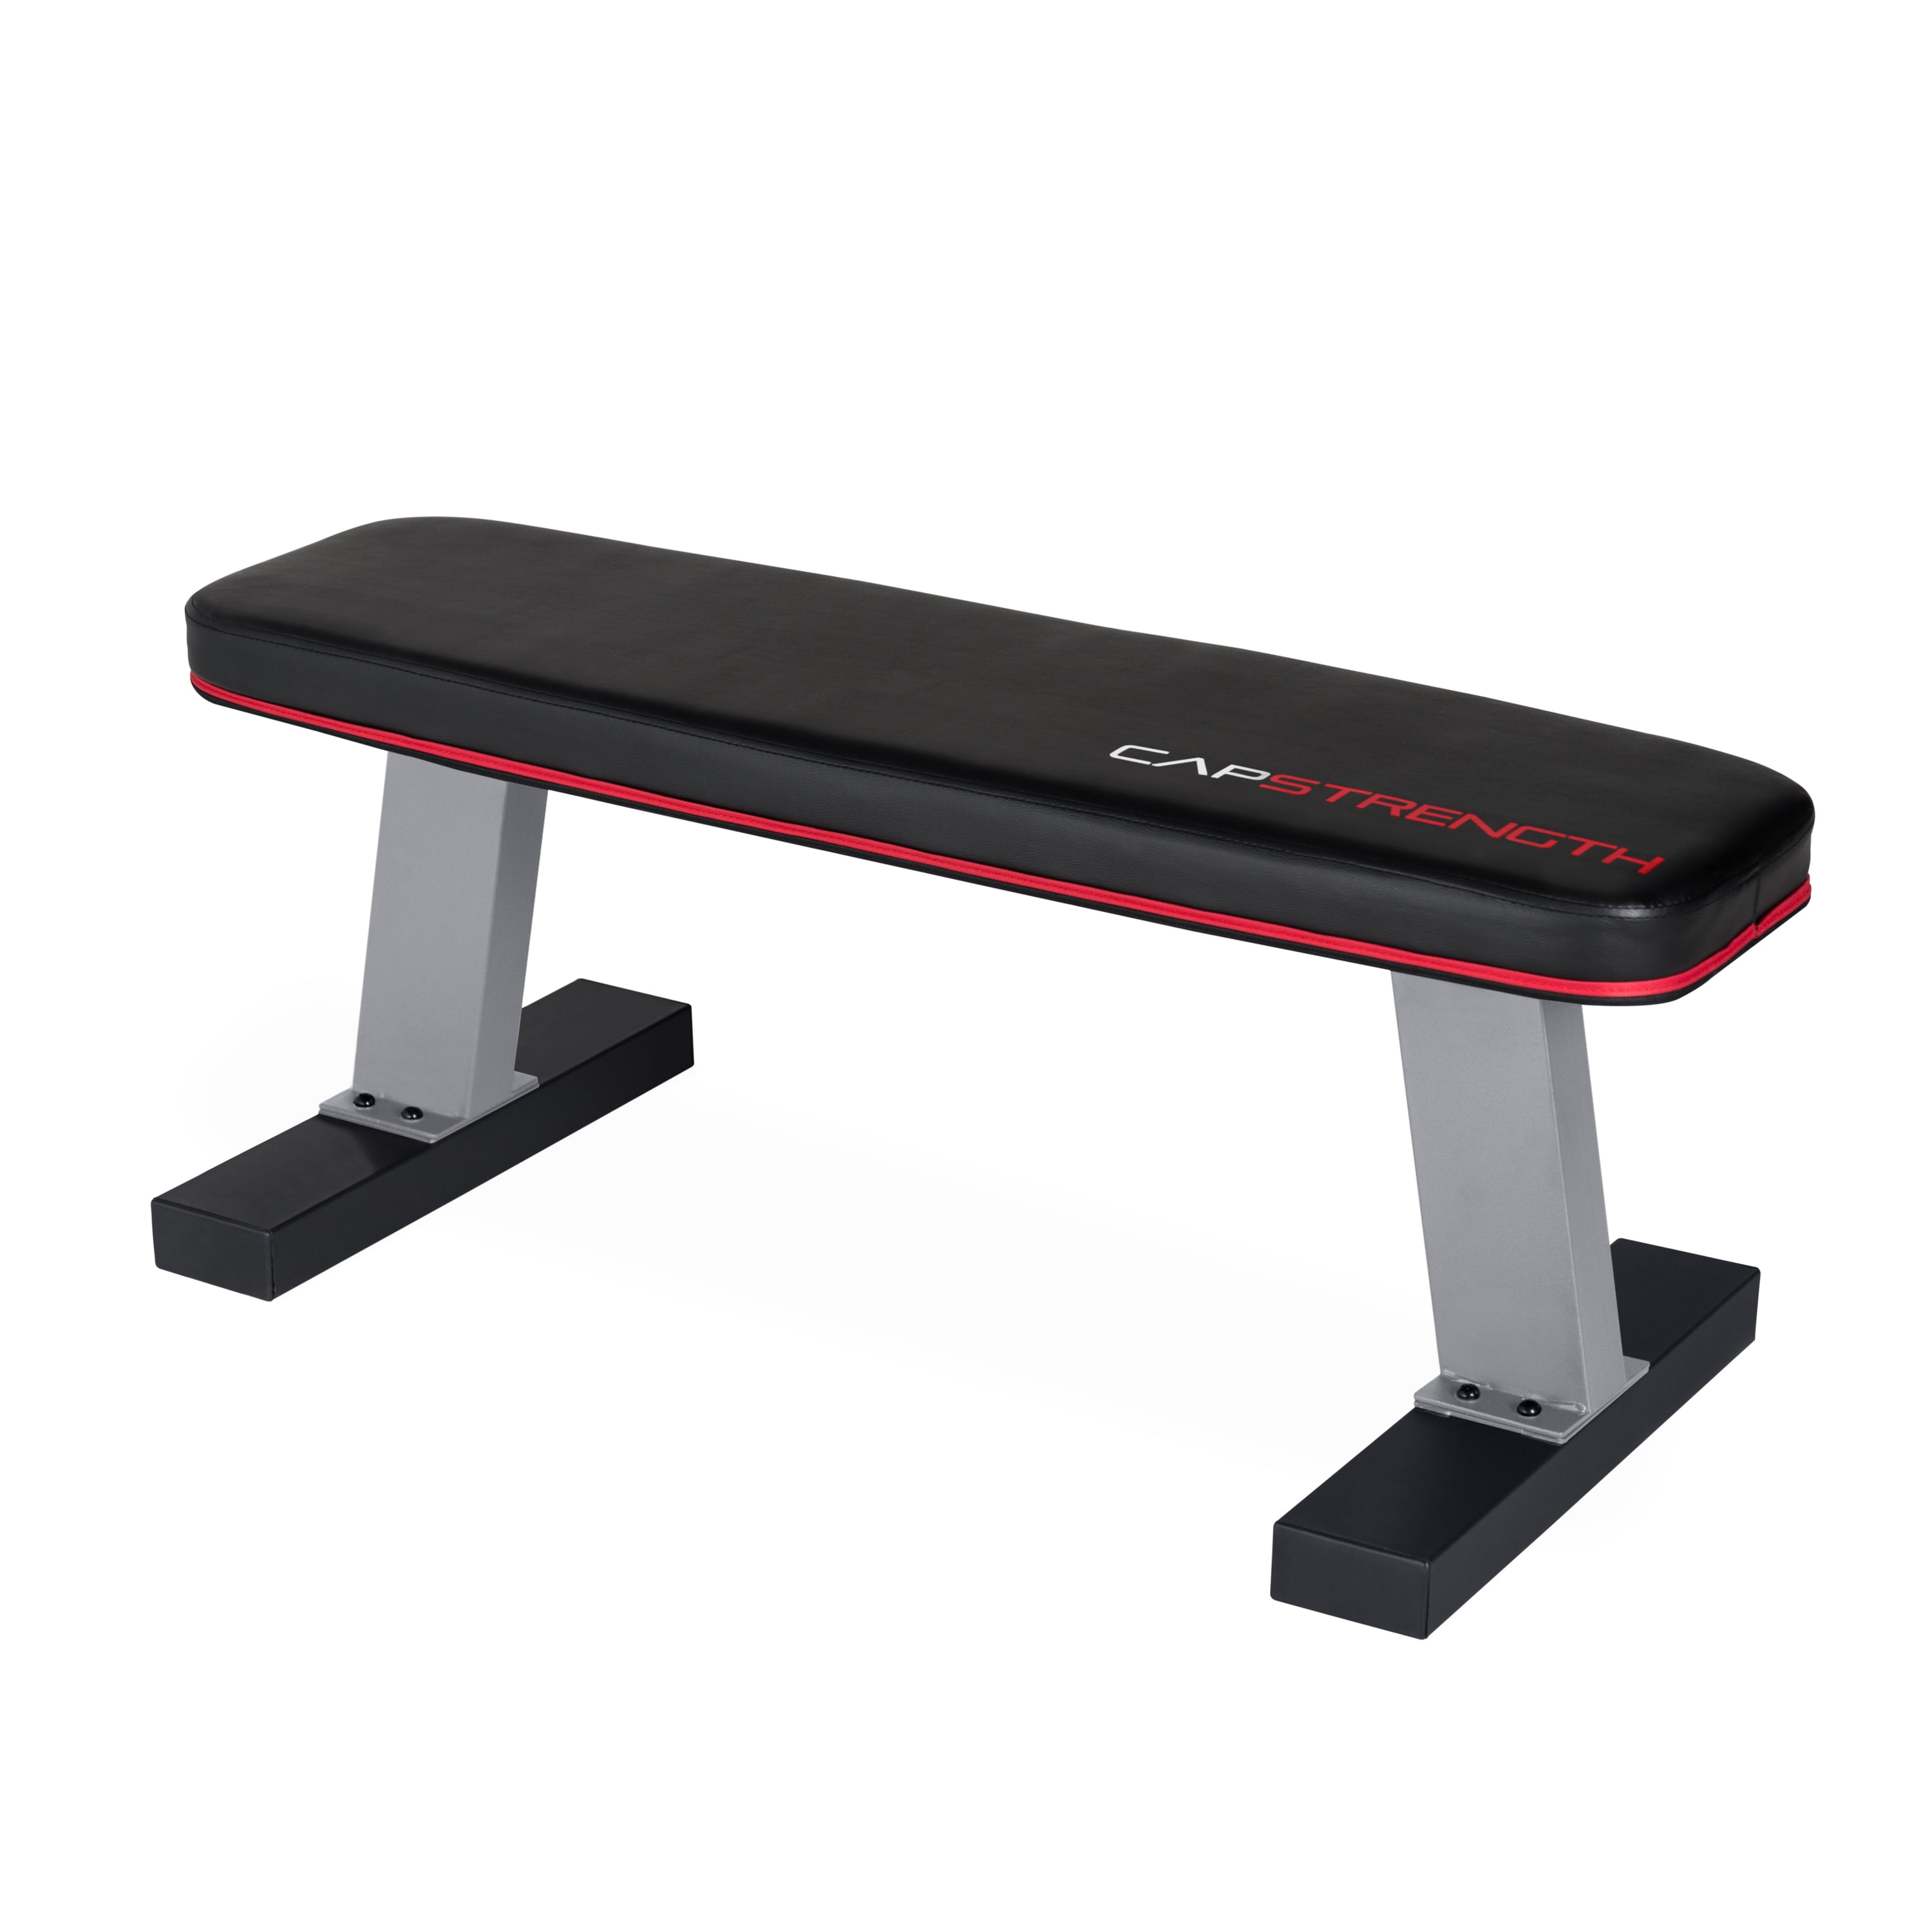 15 Minute Cap Flat Training Bench Walmart for push your ABS